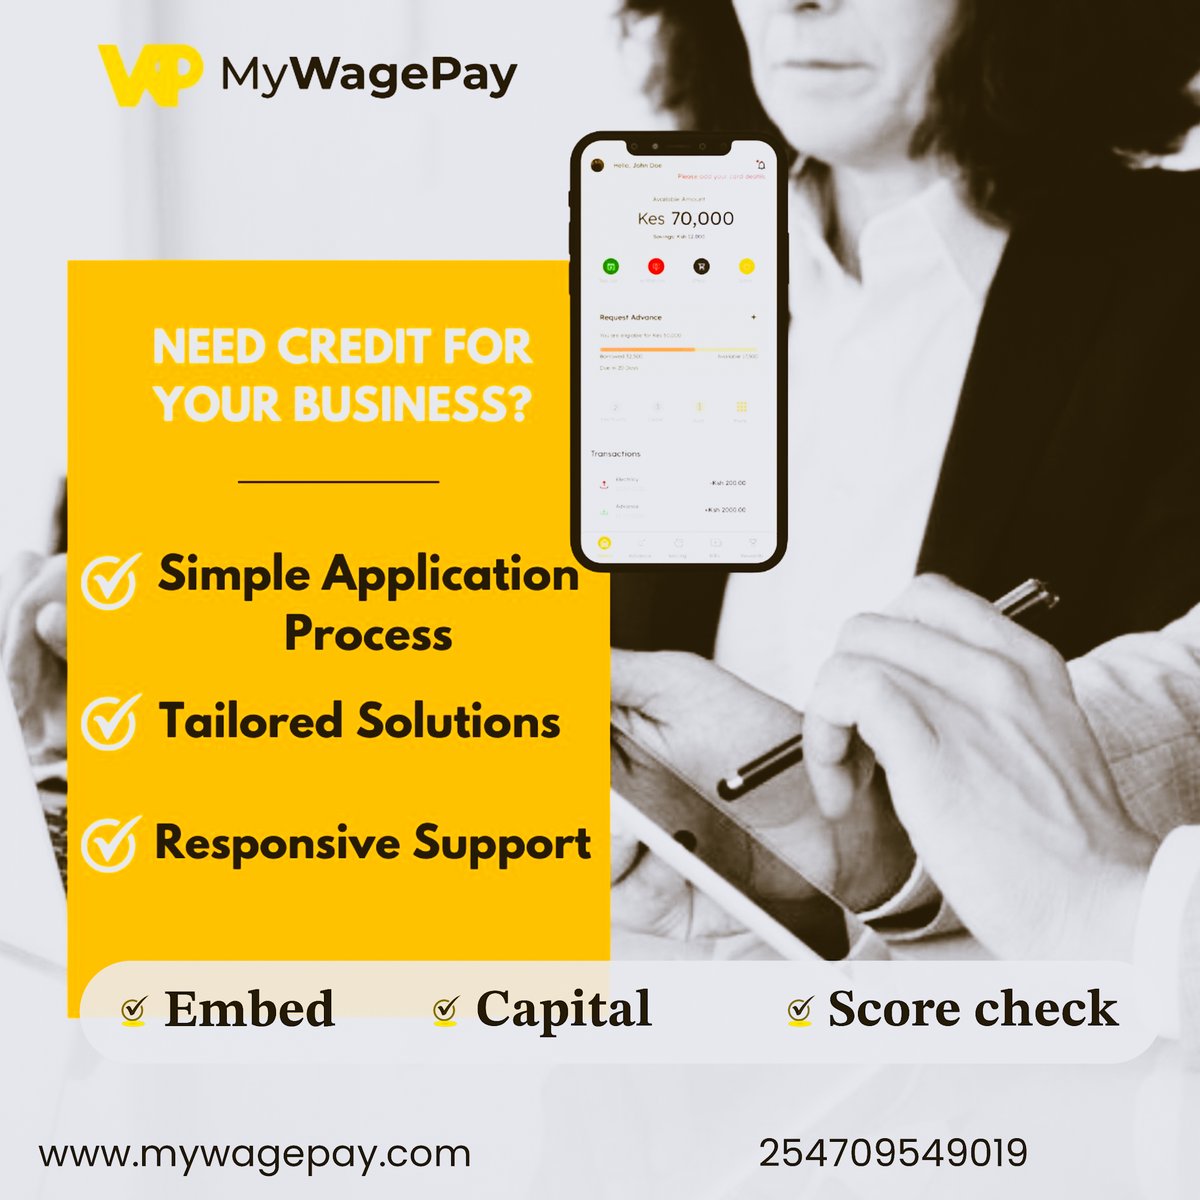 Our flexible credit options are designed to fuel your success, providing the support you need to seize every opportunity and propel your business forward. 
Reach us at 0709549019 for more information.
#fuelyoursuccess #businessempowerment #financialflexibility #mywagepay